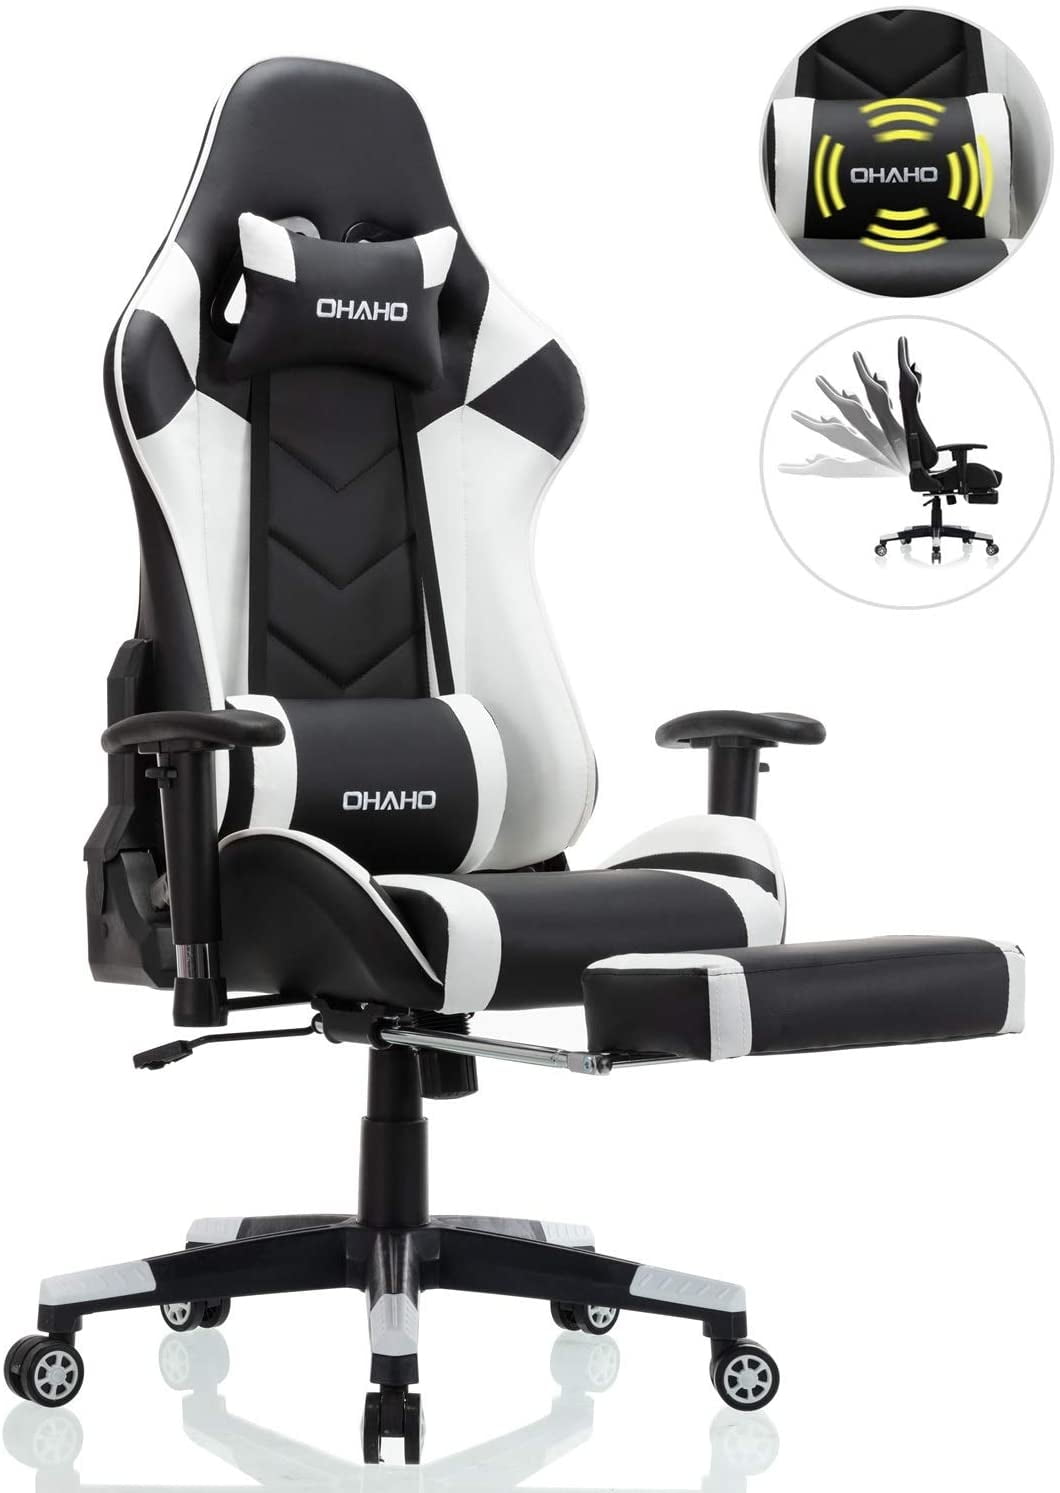 Ohaho Gaming Chair Racing Style Office Chair Adjustable Massage Lumbar Cushion Swivel Rocker Recliner Leather High Back Ergonomic Computer Desk Chair With Retractable Arms And Footrest Black White Walmart Com Walmart Com